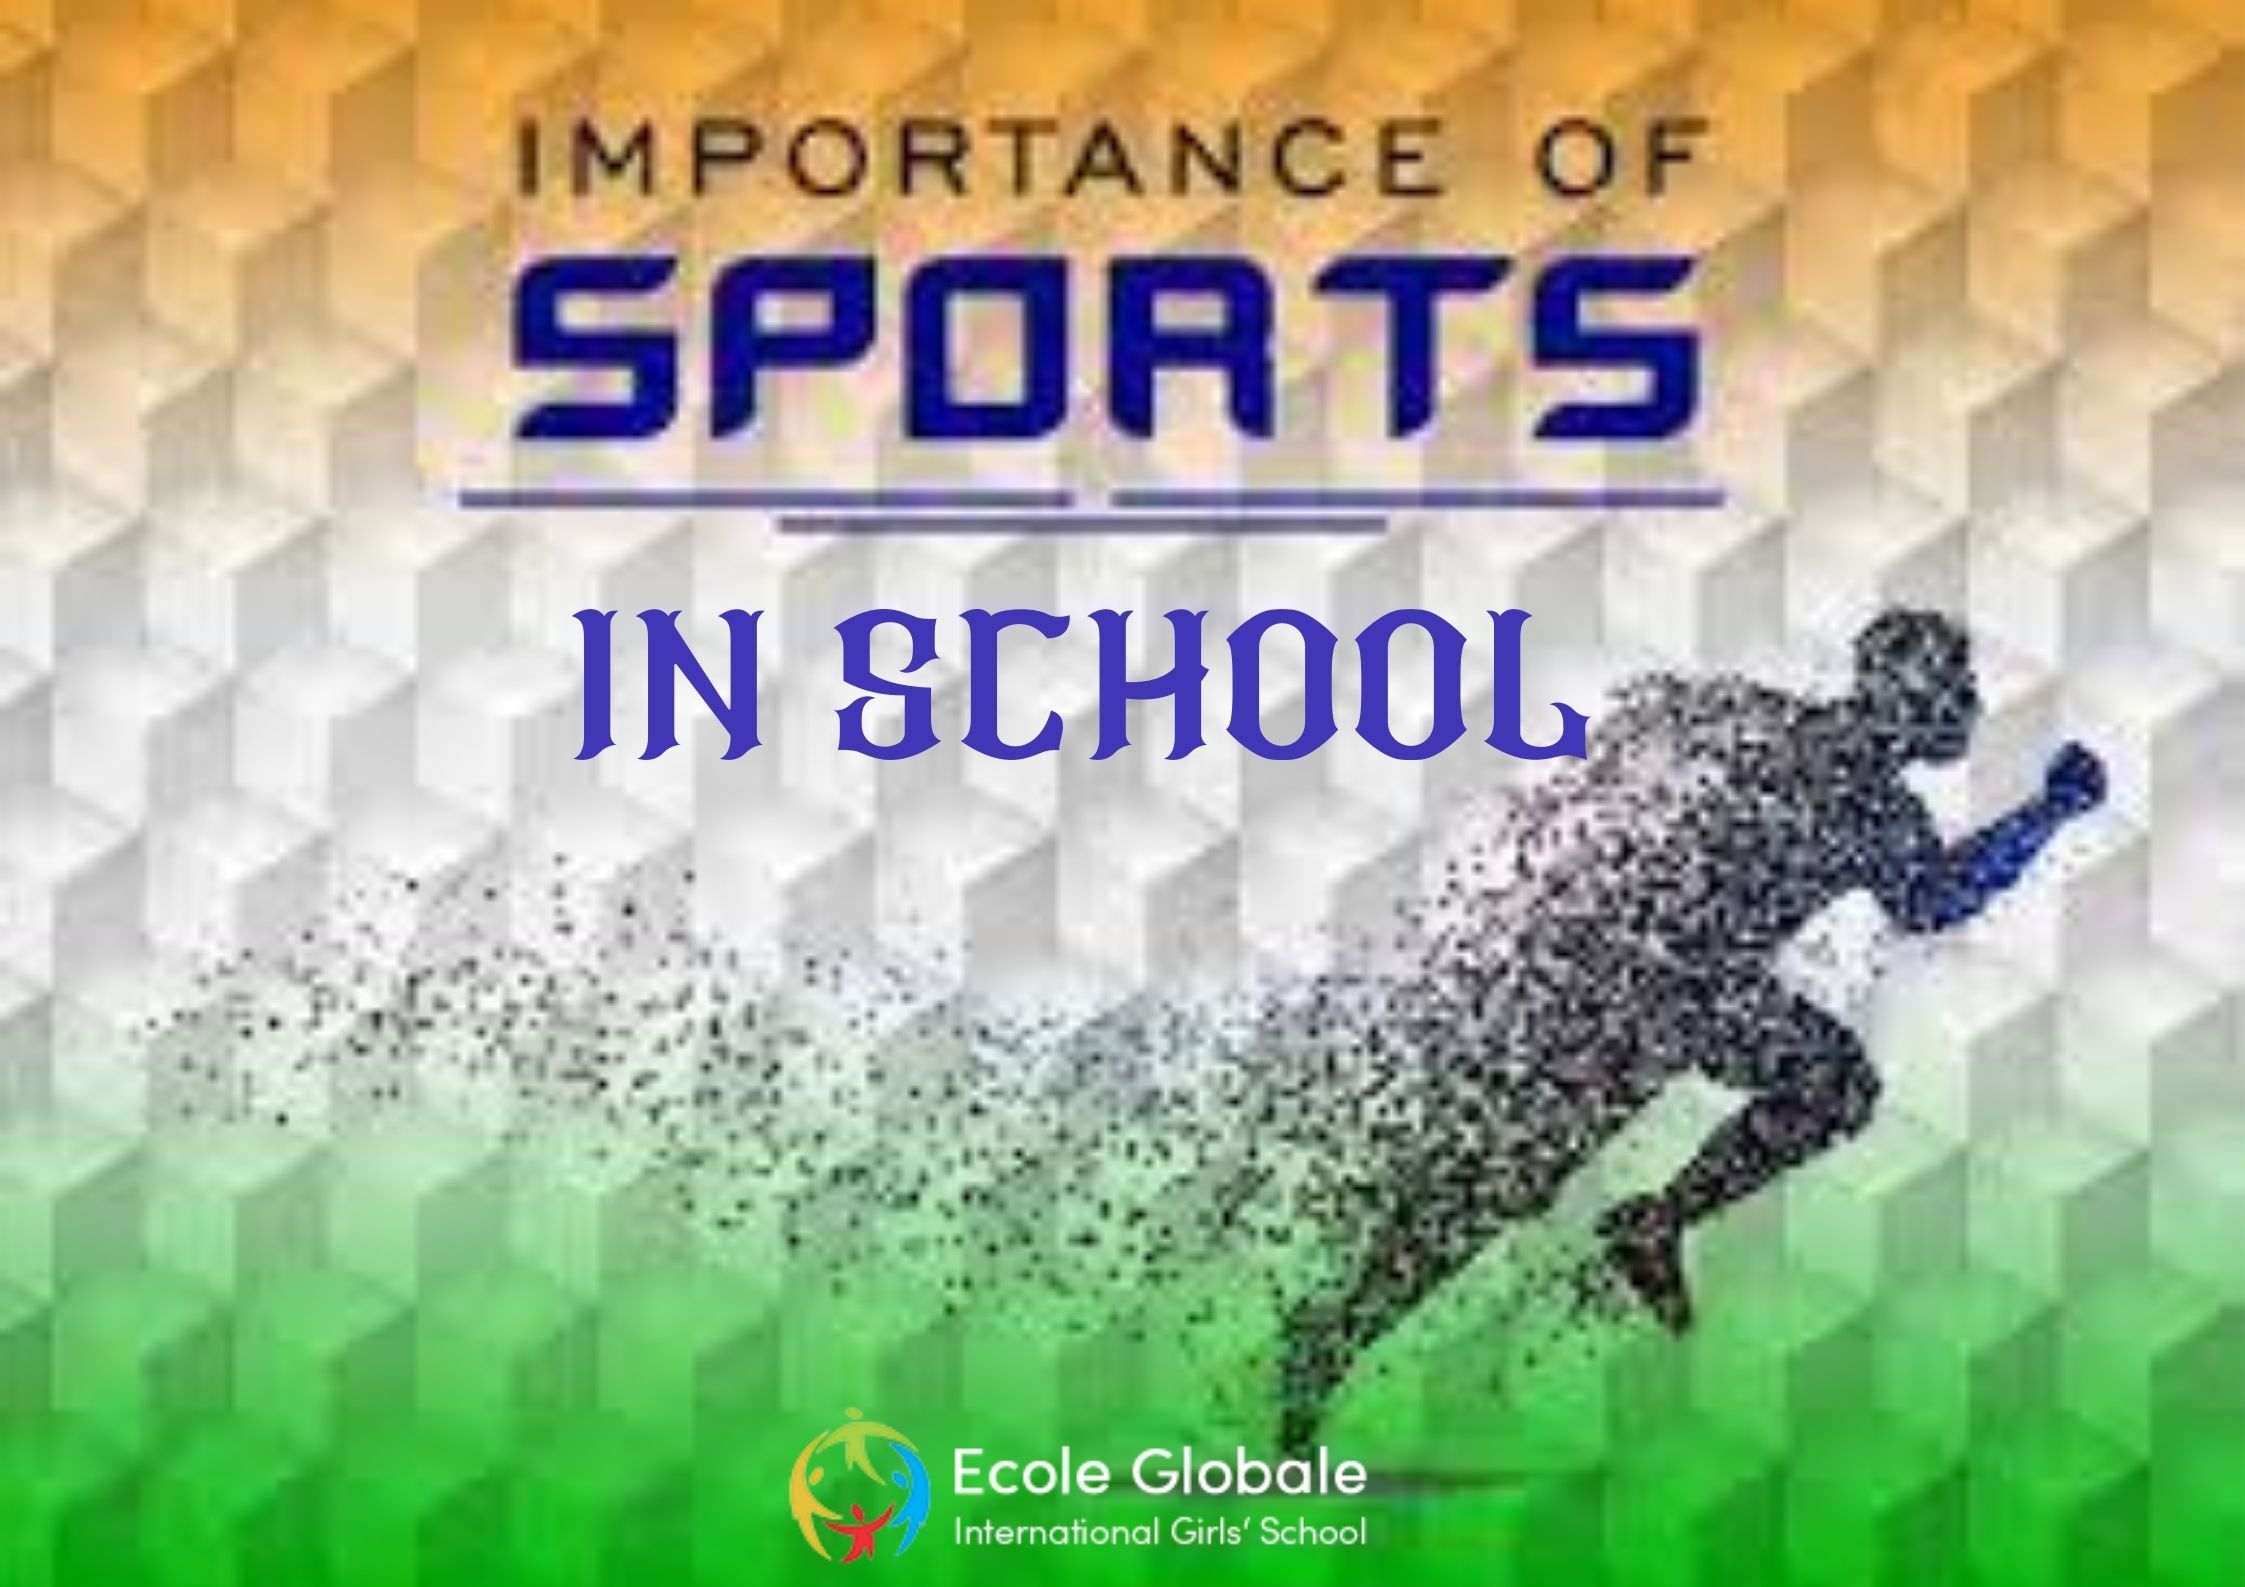 Why are sports important in schools?